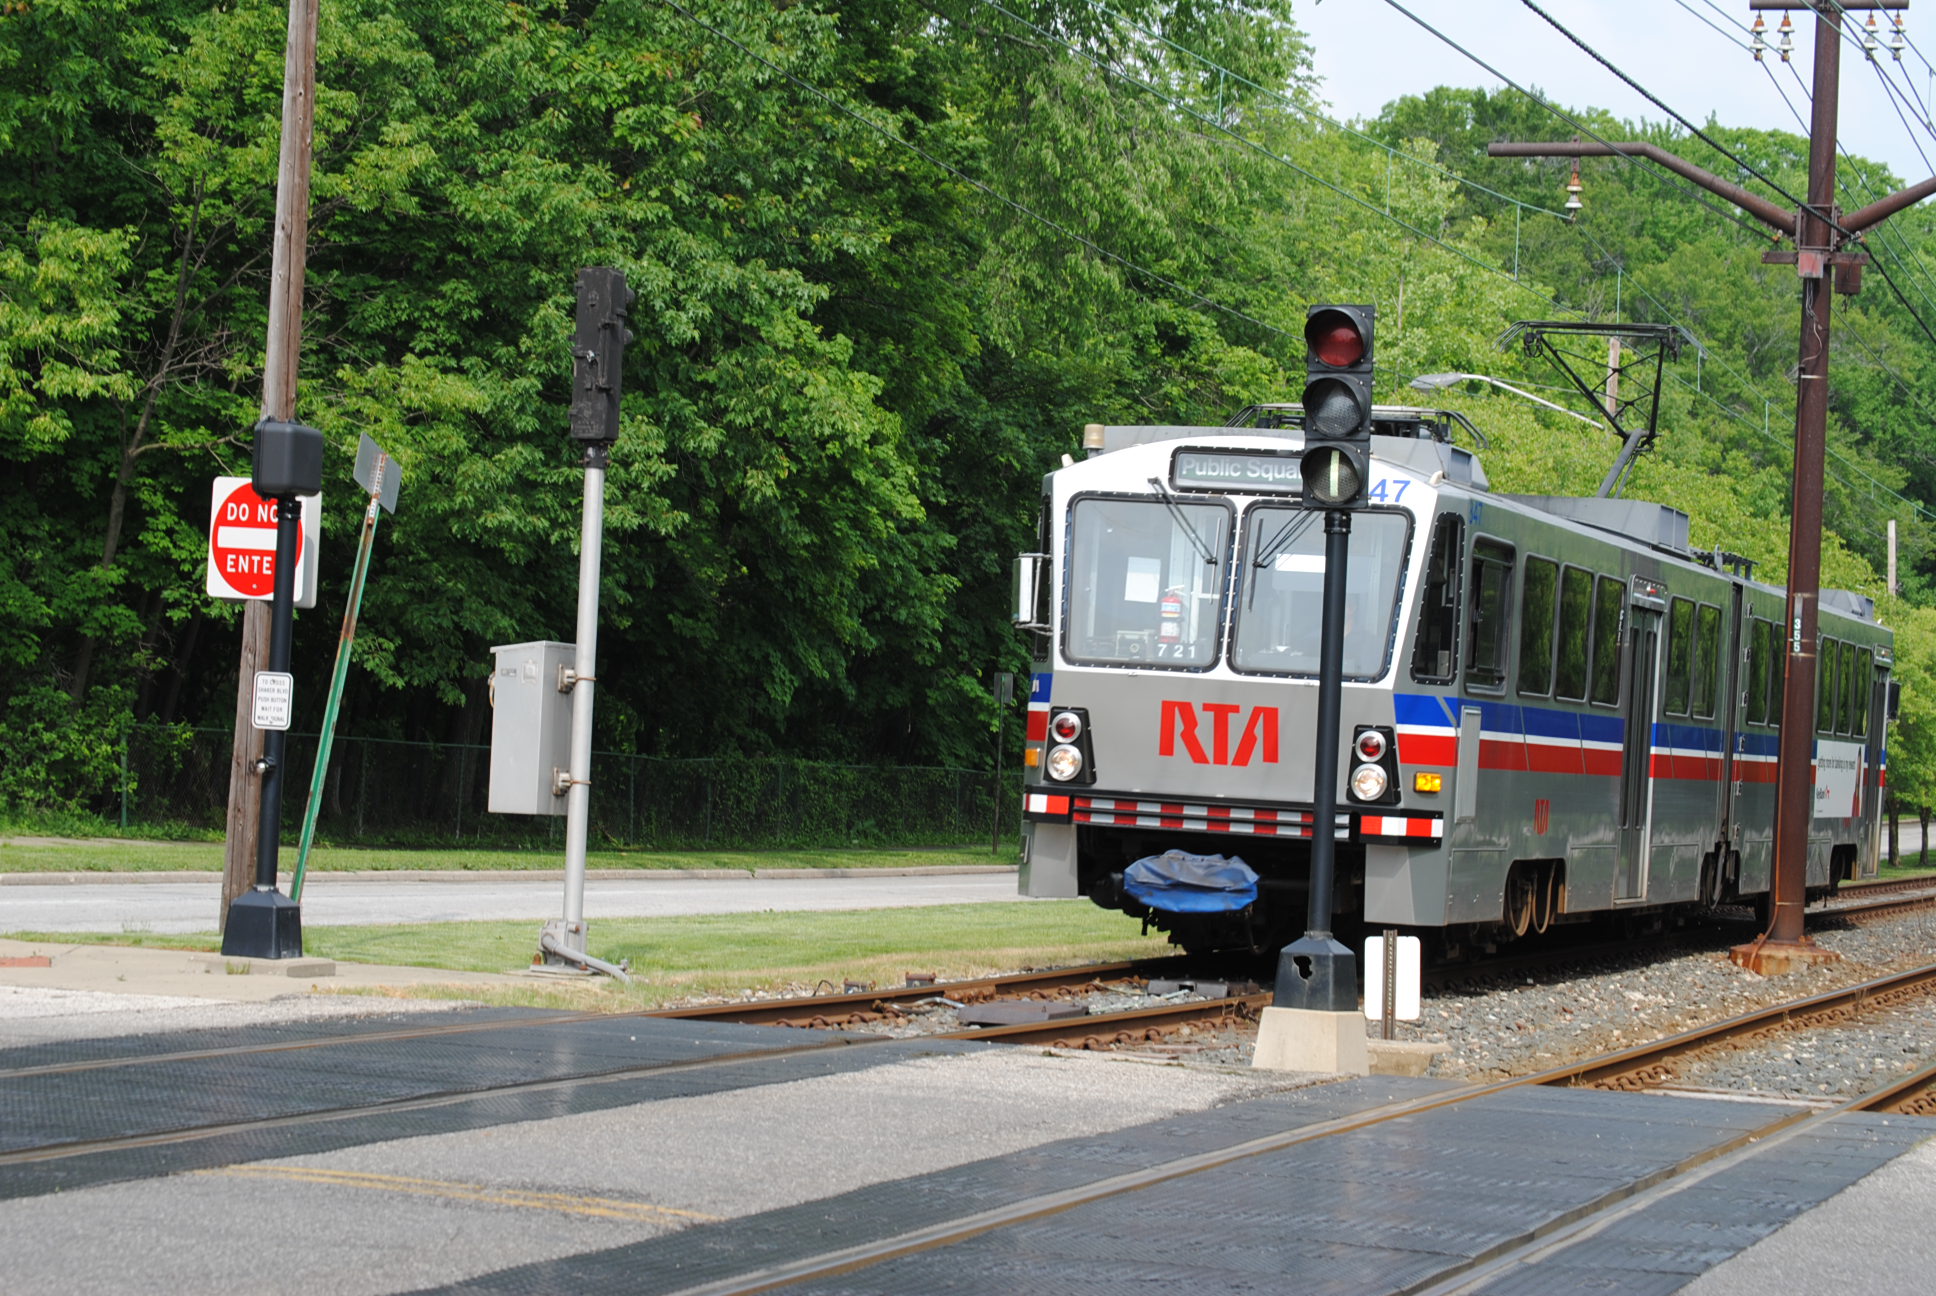  Dec. 17, 2015: Public meeting set to discuss new station at Lee-Shaker